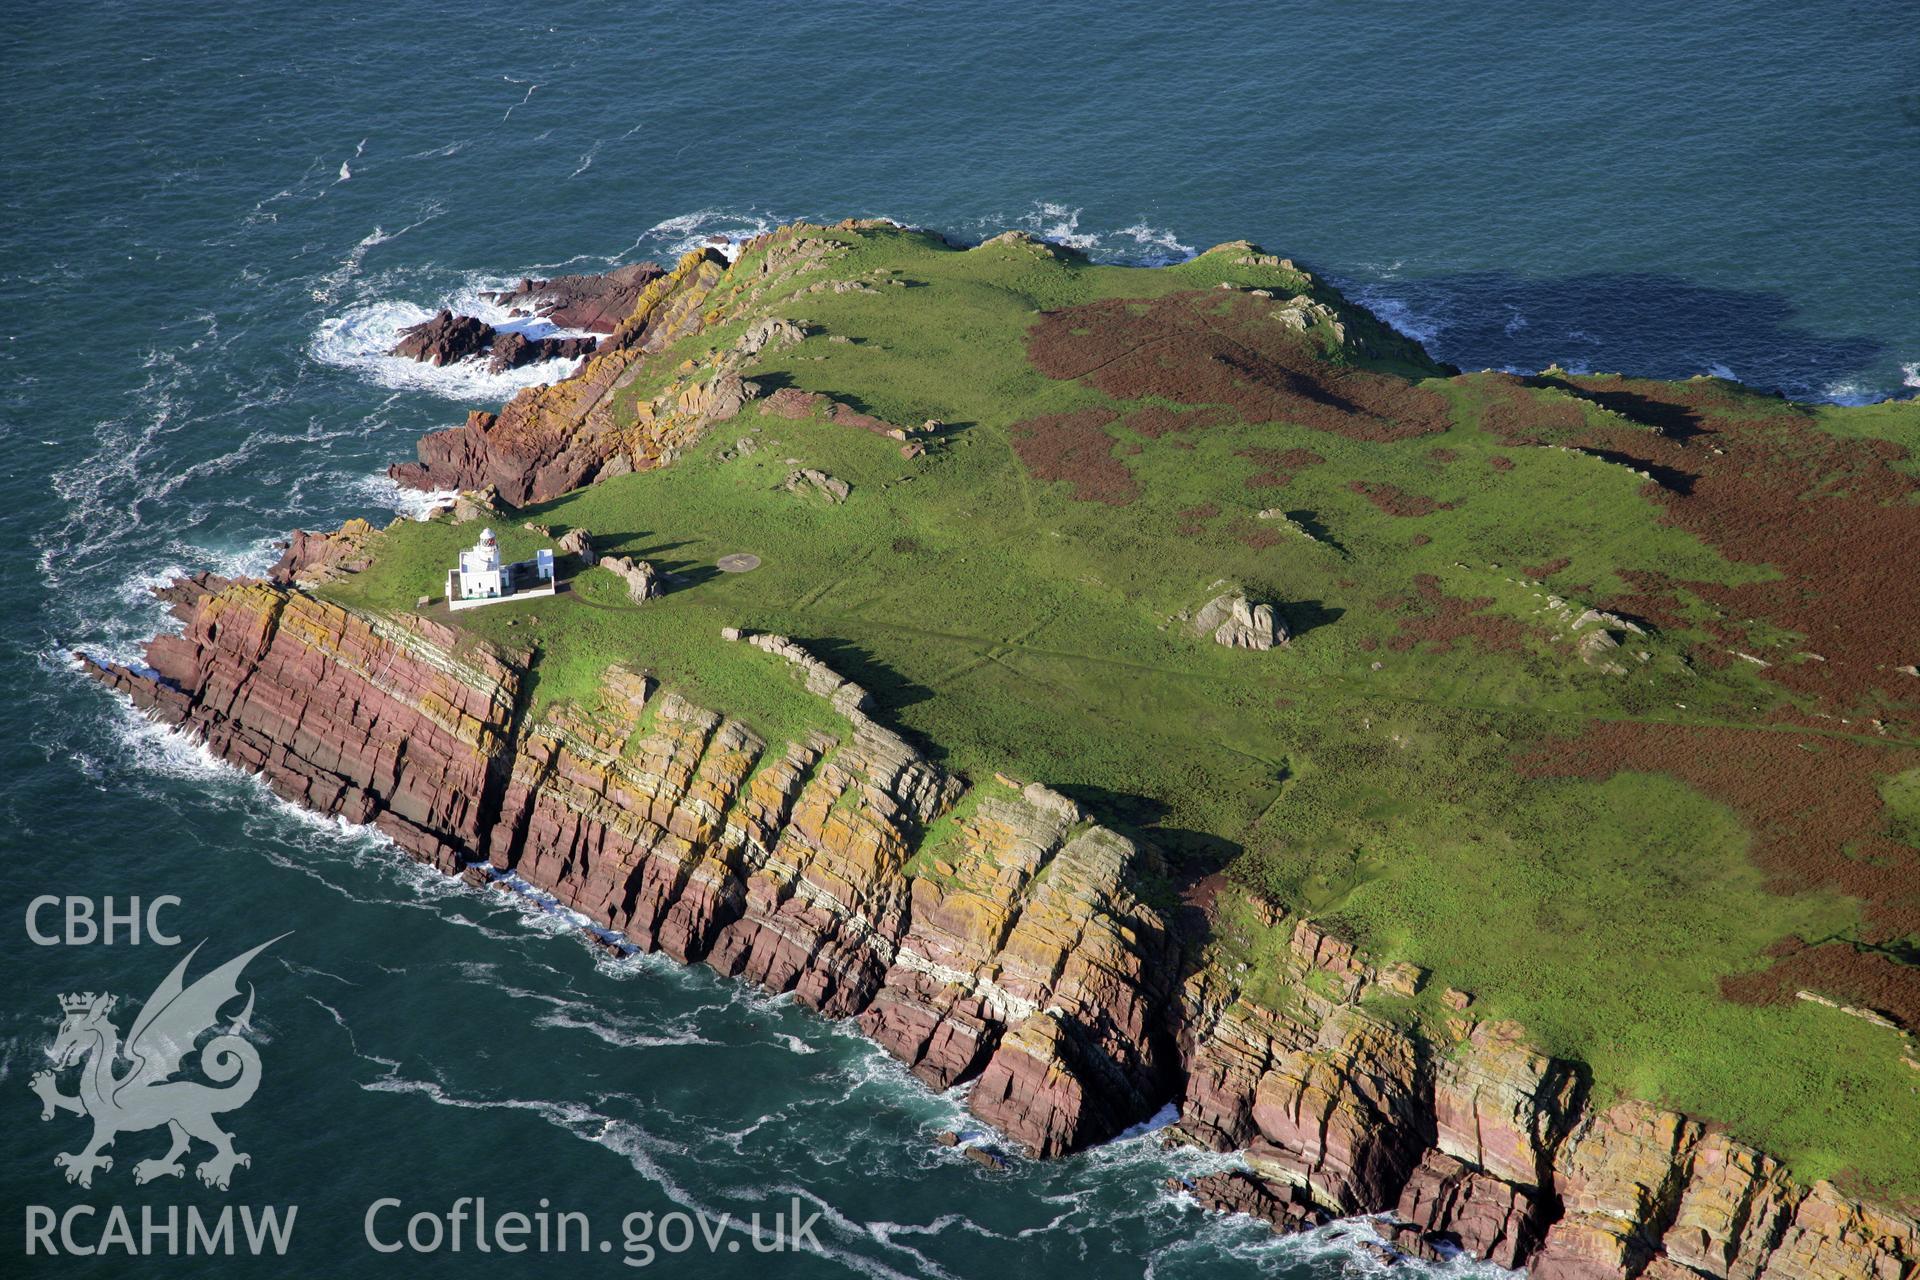 RCAHMW colour oblique photograph of Skokholm Island and lighthouse, viewed from the south. Taken by O. Davies & T. Driver on 22/11/2013.